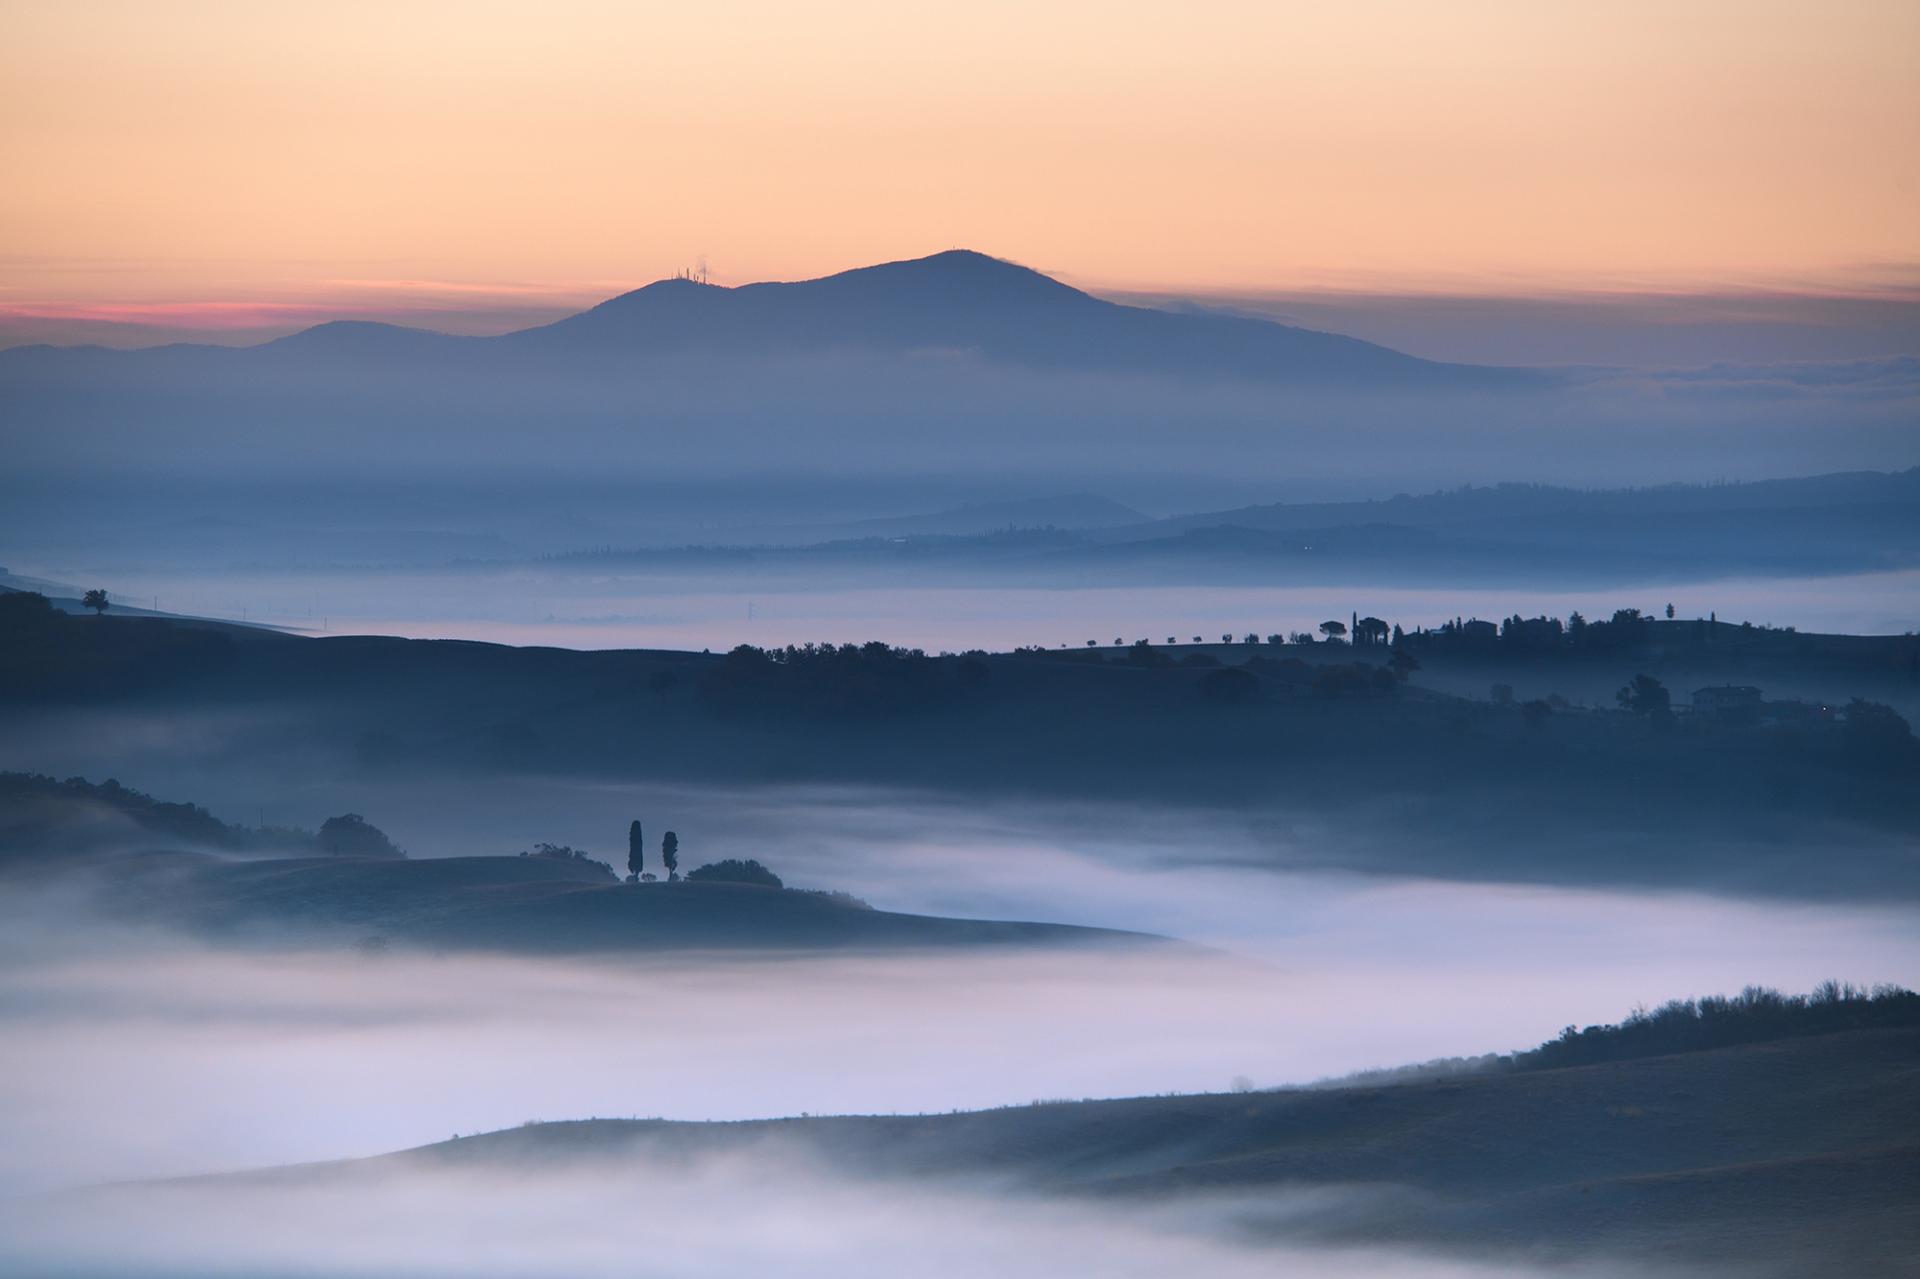 London Photography Awards Winner - Sea of Dreams in Val d'Orcia